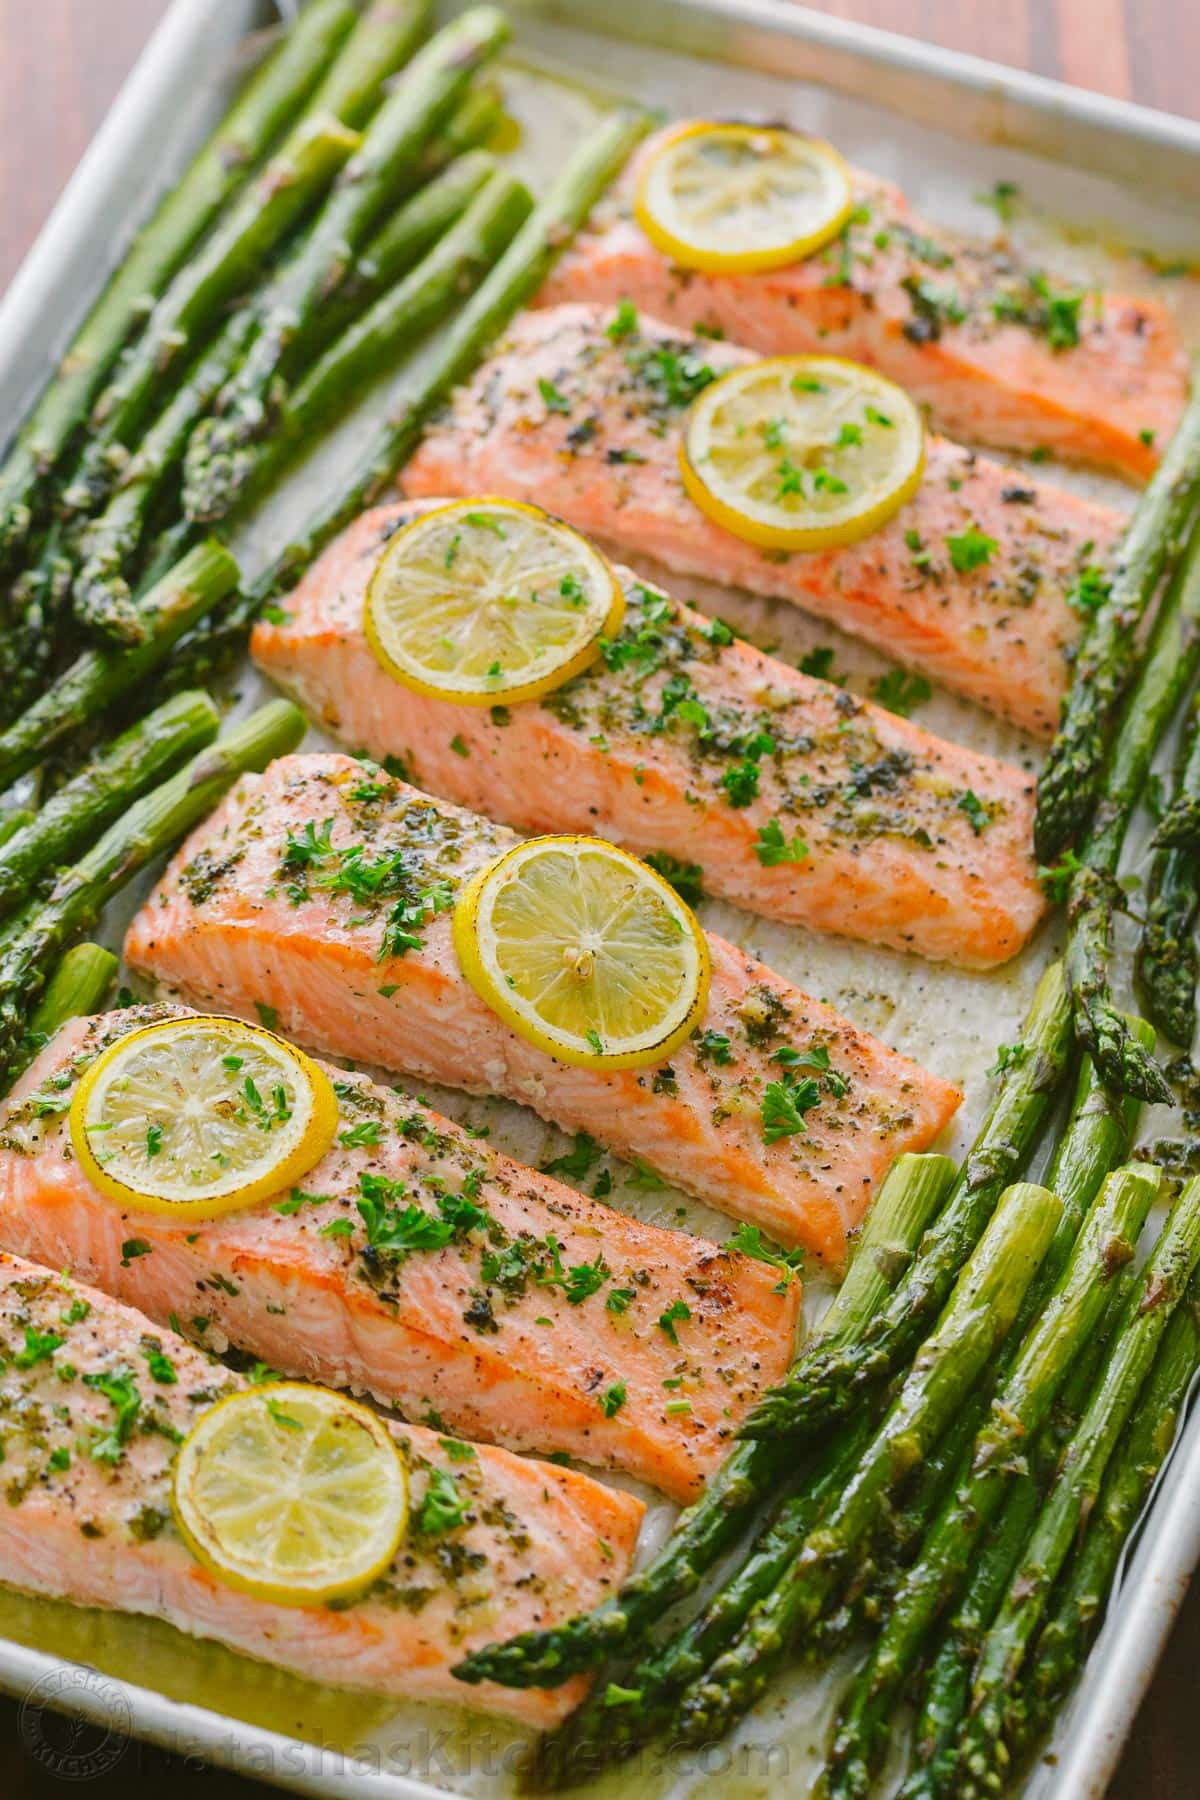 Baking Salmon and asparagus Elegant Recipe Yummy Baked Salmon with asparagus Easy Food